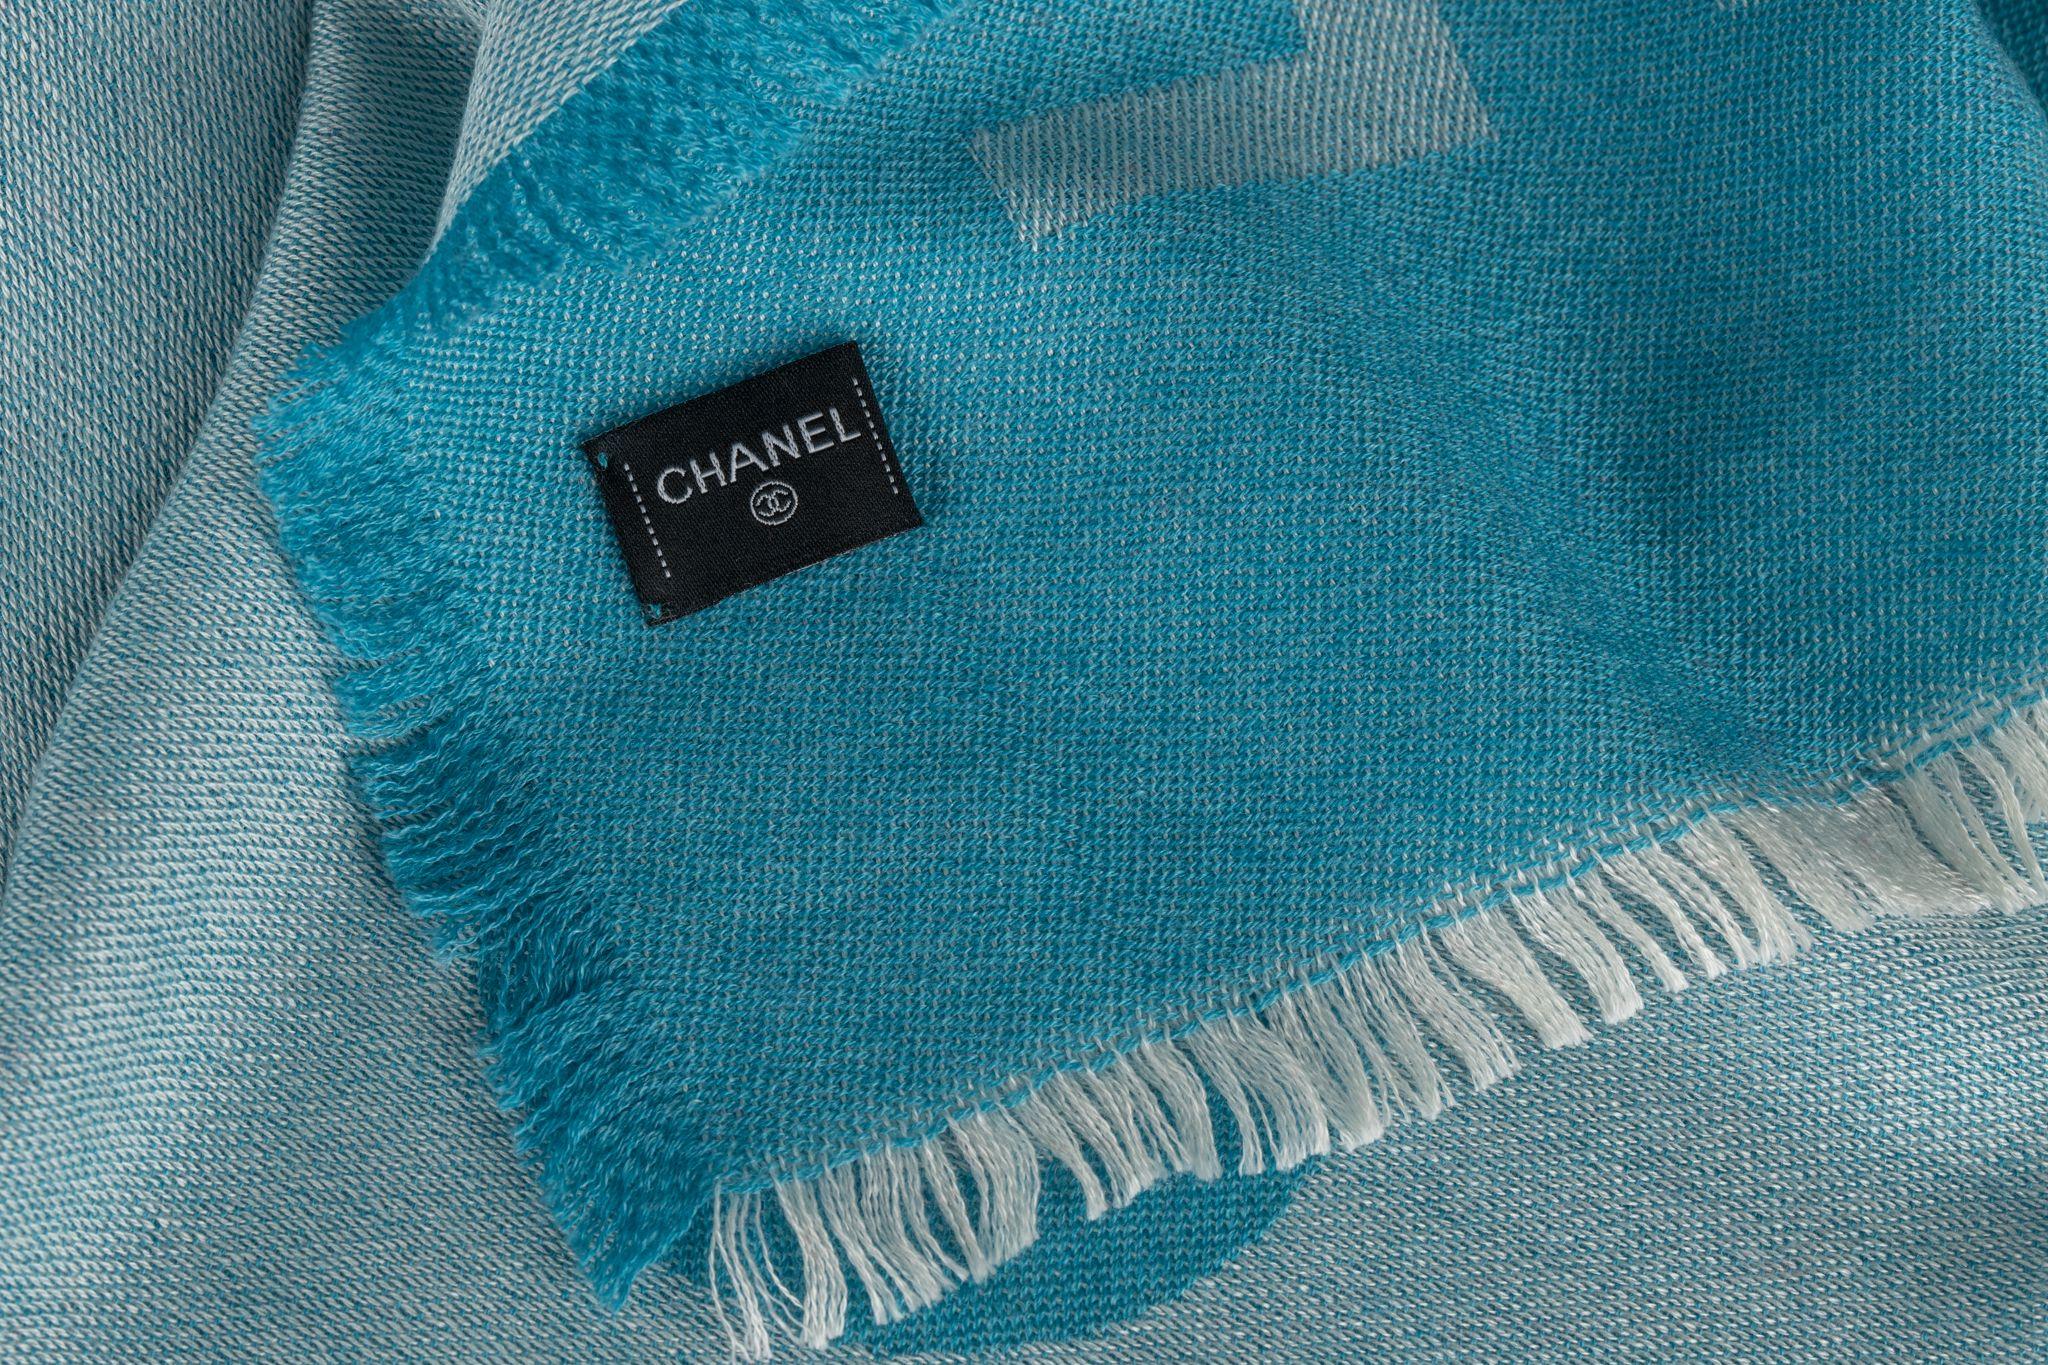 Chanel New Cashmere Shawl in Turquoise In Excellent Condition For Sale In West Hollywood, CA